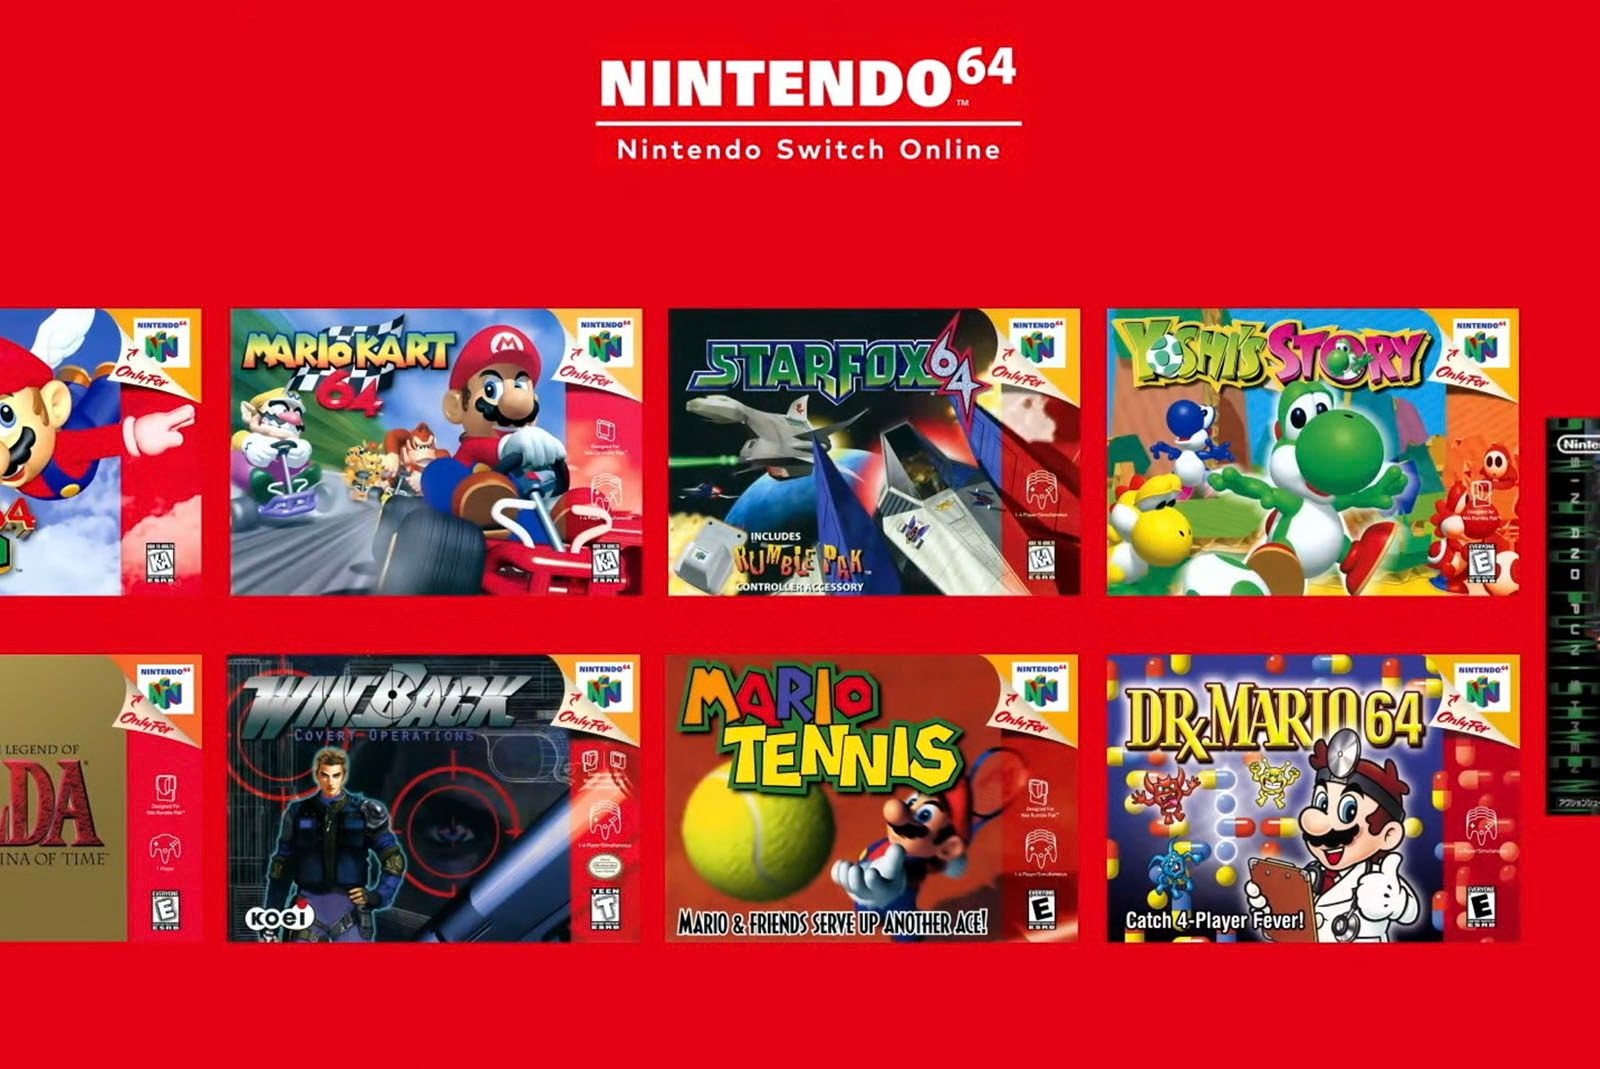 Four New Retro Games Coming to Nintendo Switch Online